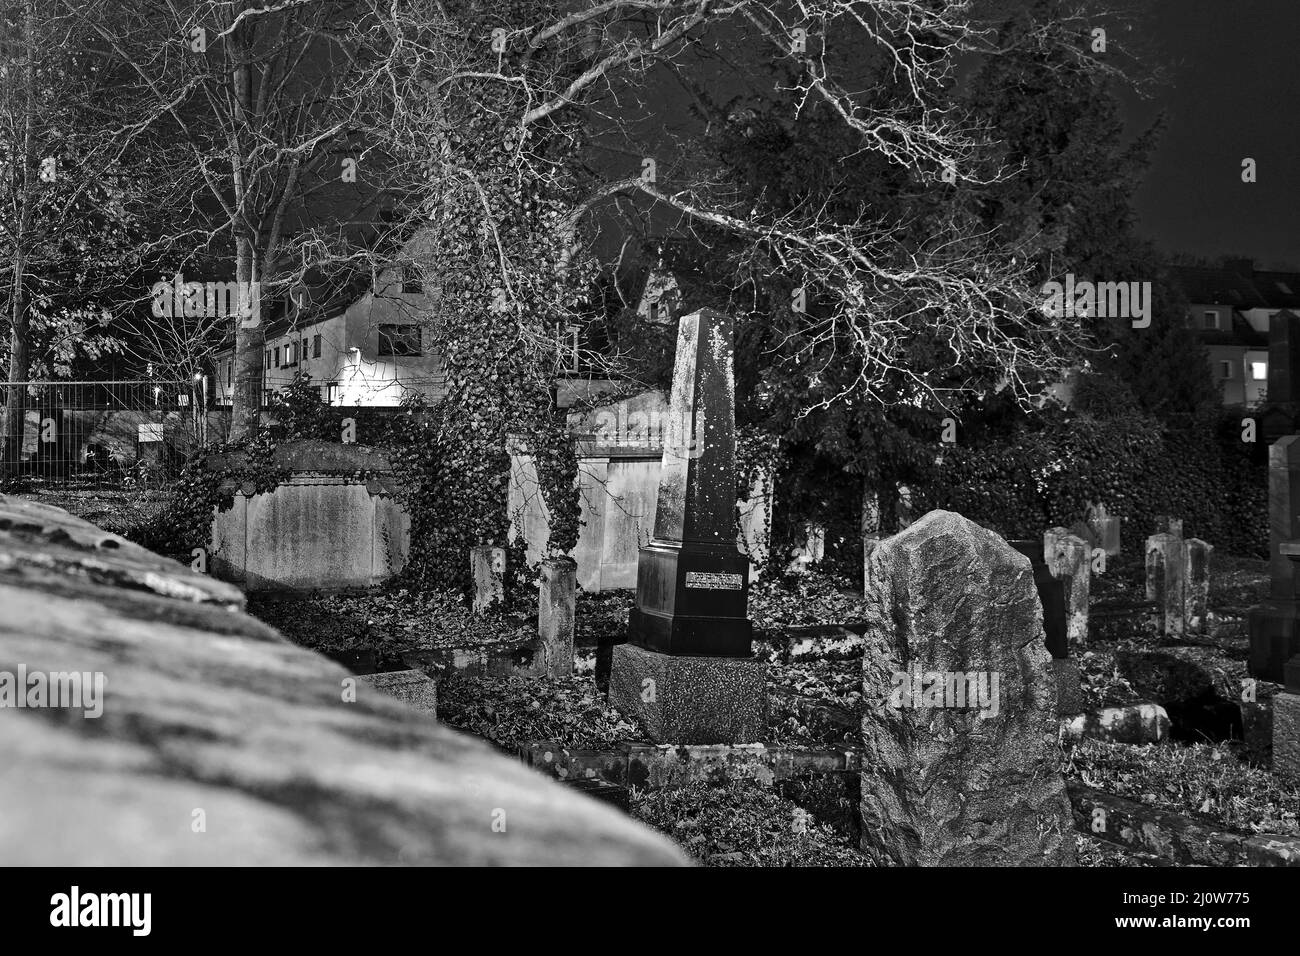 Jewish cemetery at night, in the background Residential buildings, Goettingen, Germany, Europe Stock Photo